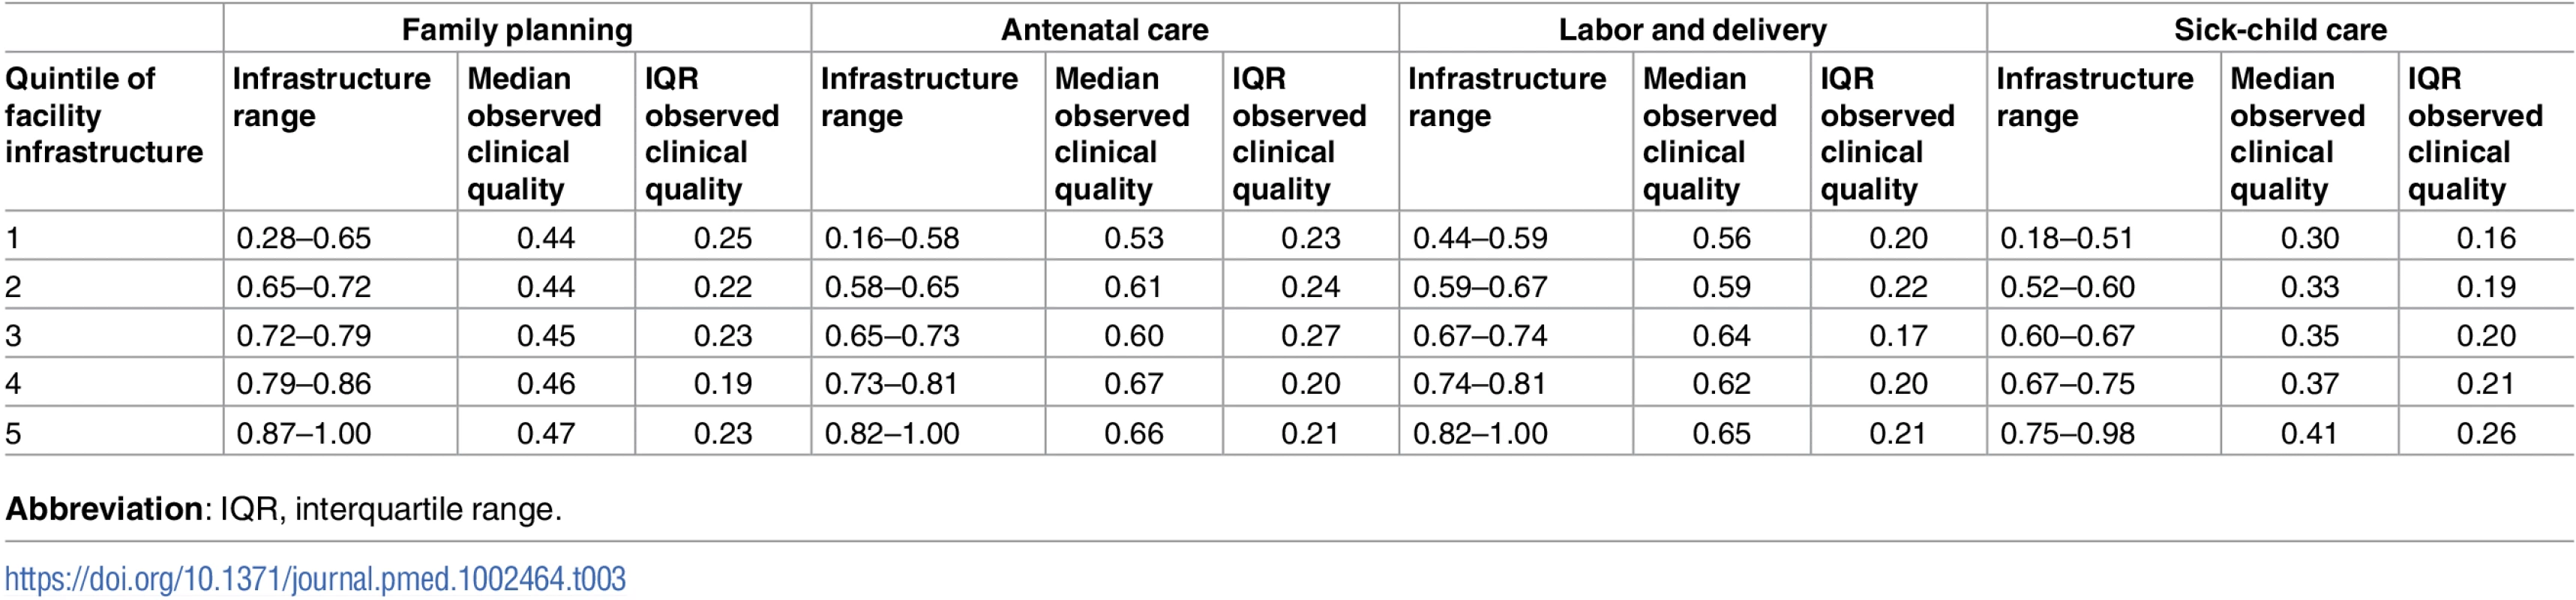 Median and interquartile range of observed clinical quality by quintile of infrastructure.